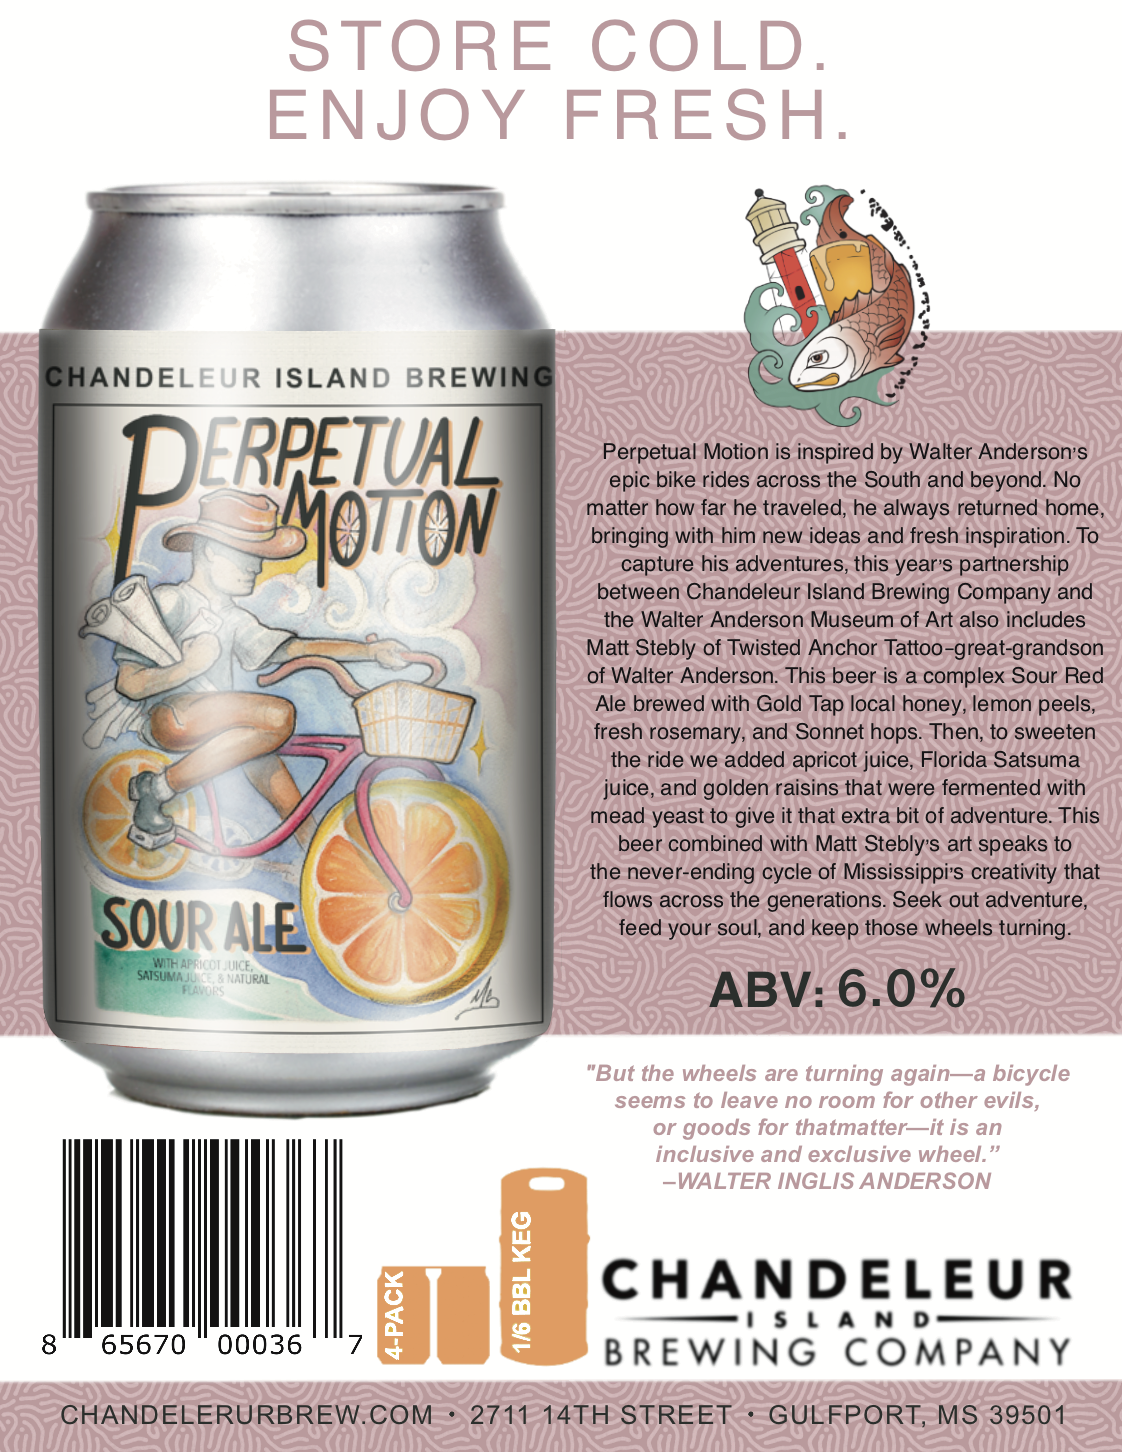 Our Beer – Chandeleur Island Brewing Company